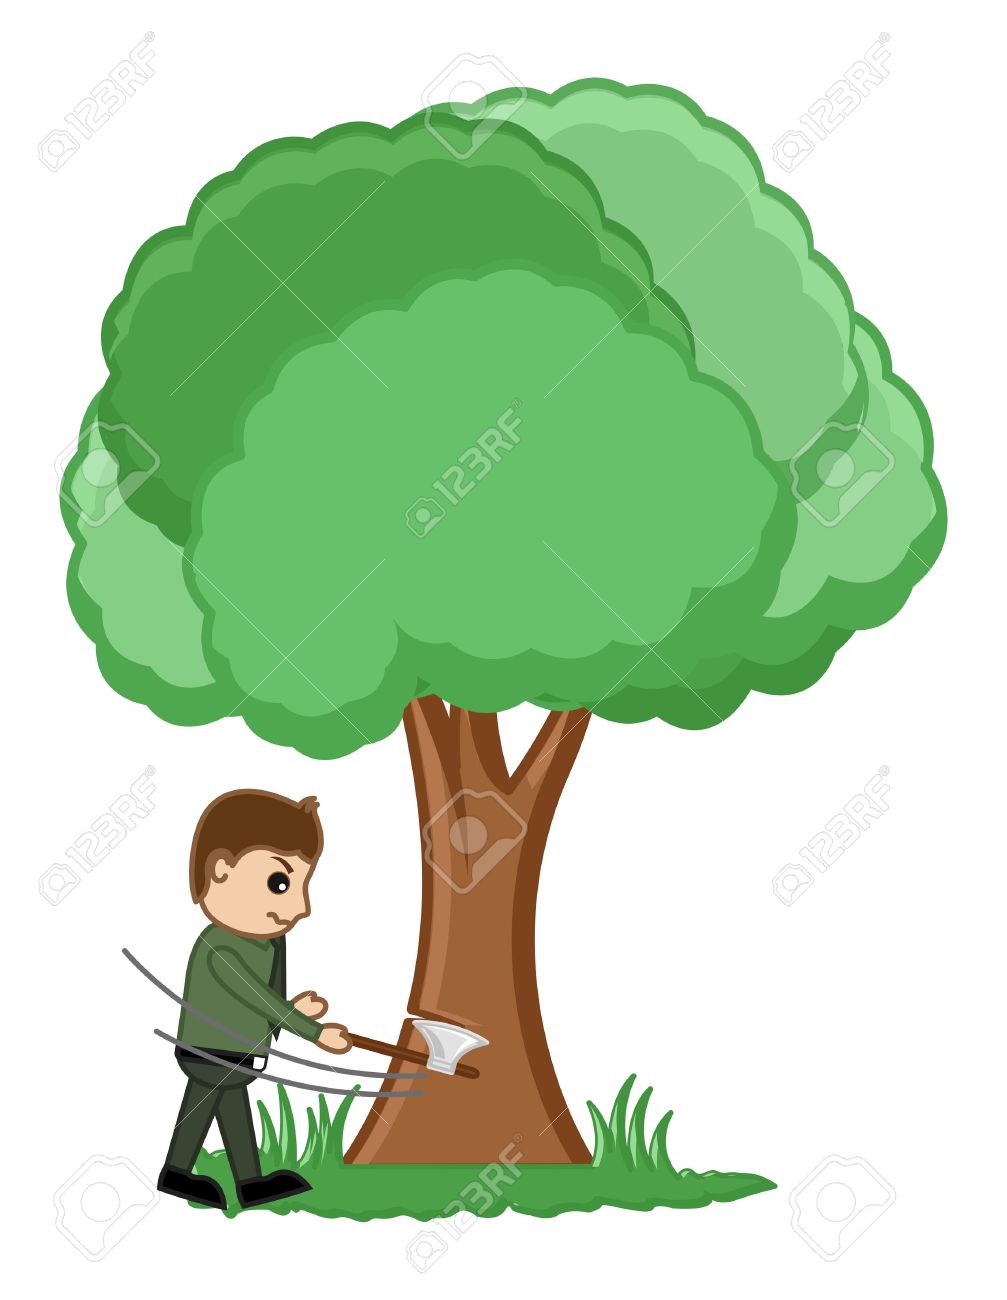 Man Cutting Tree Illustration Royalty Free Cliparts, Vectors, And.